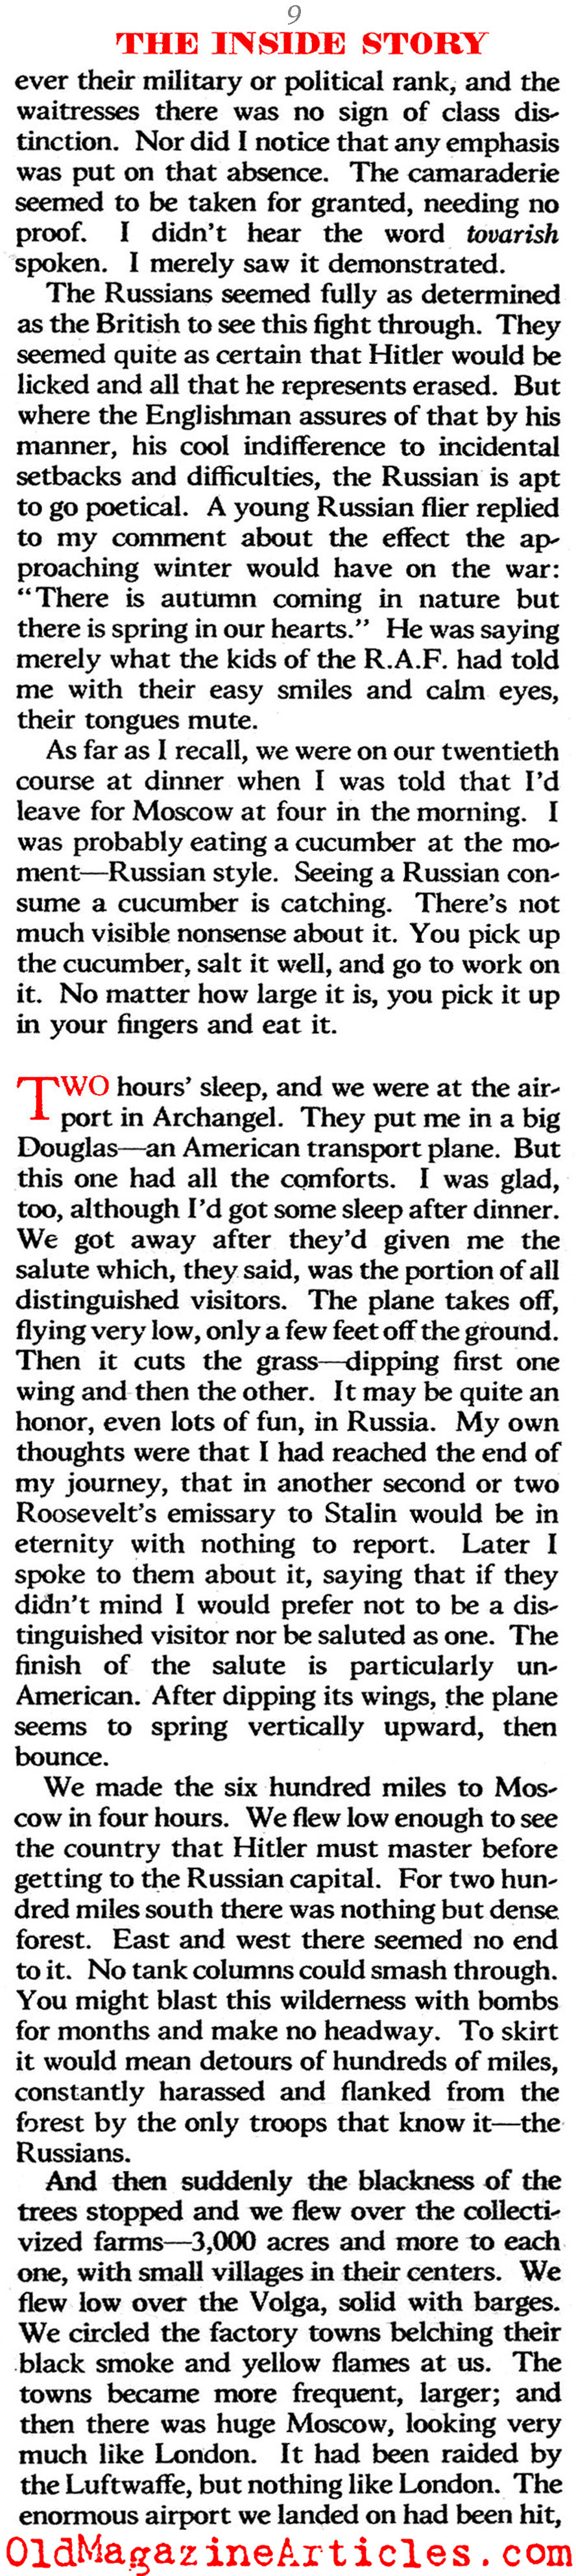 Harry Hopkins and Stalin (The American Magazine, 1941)